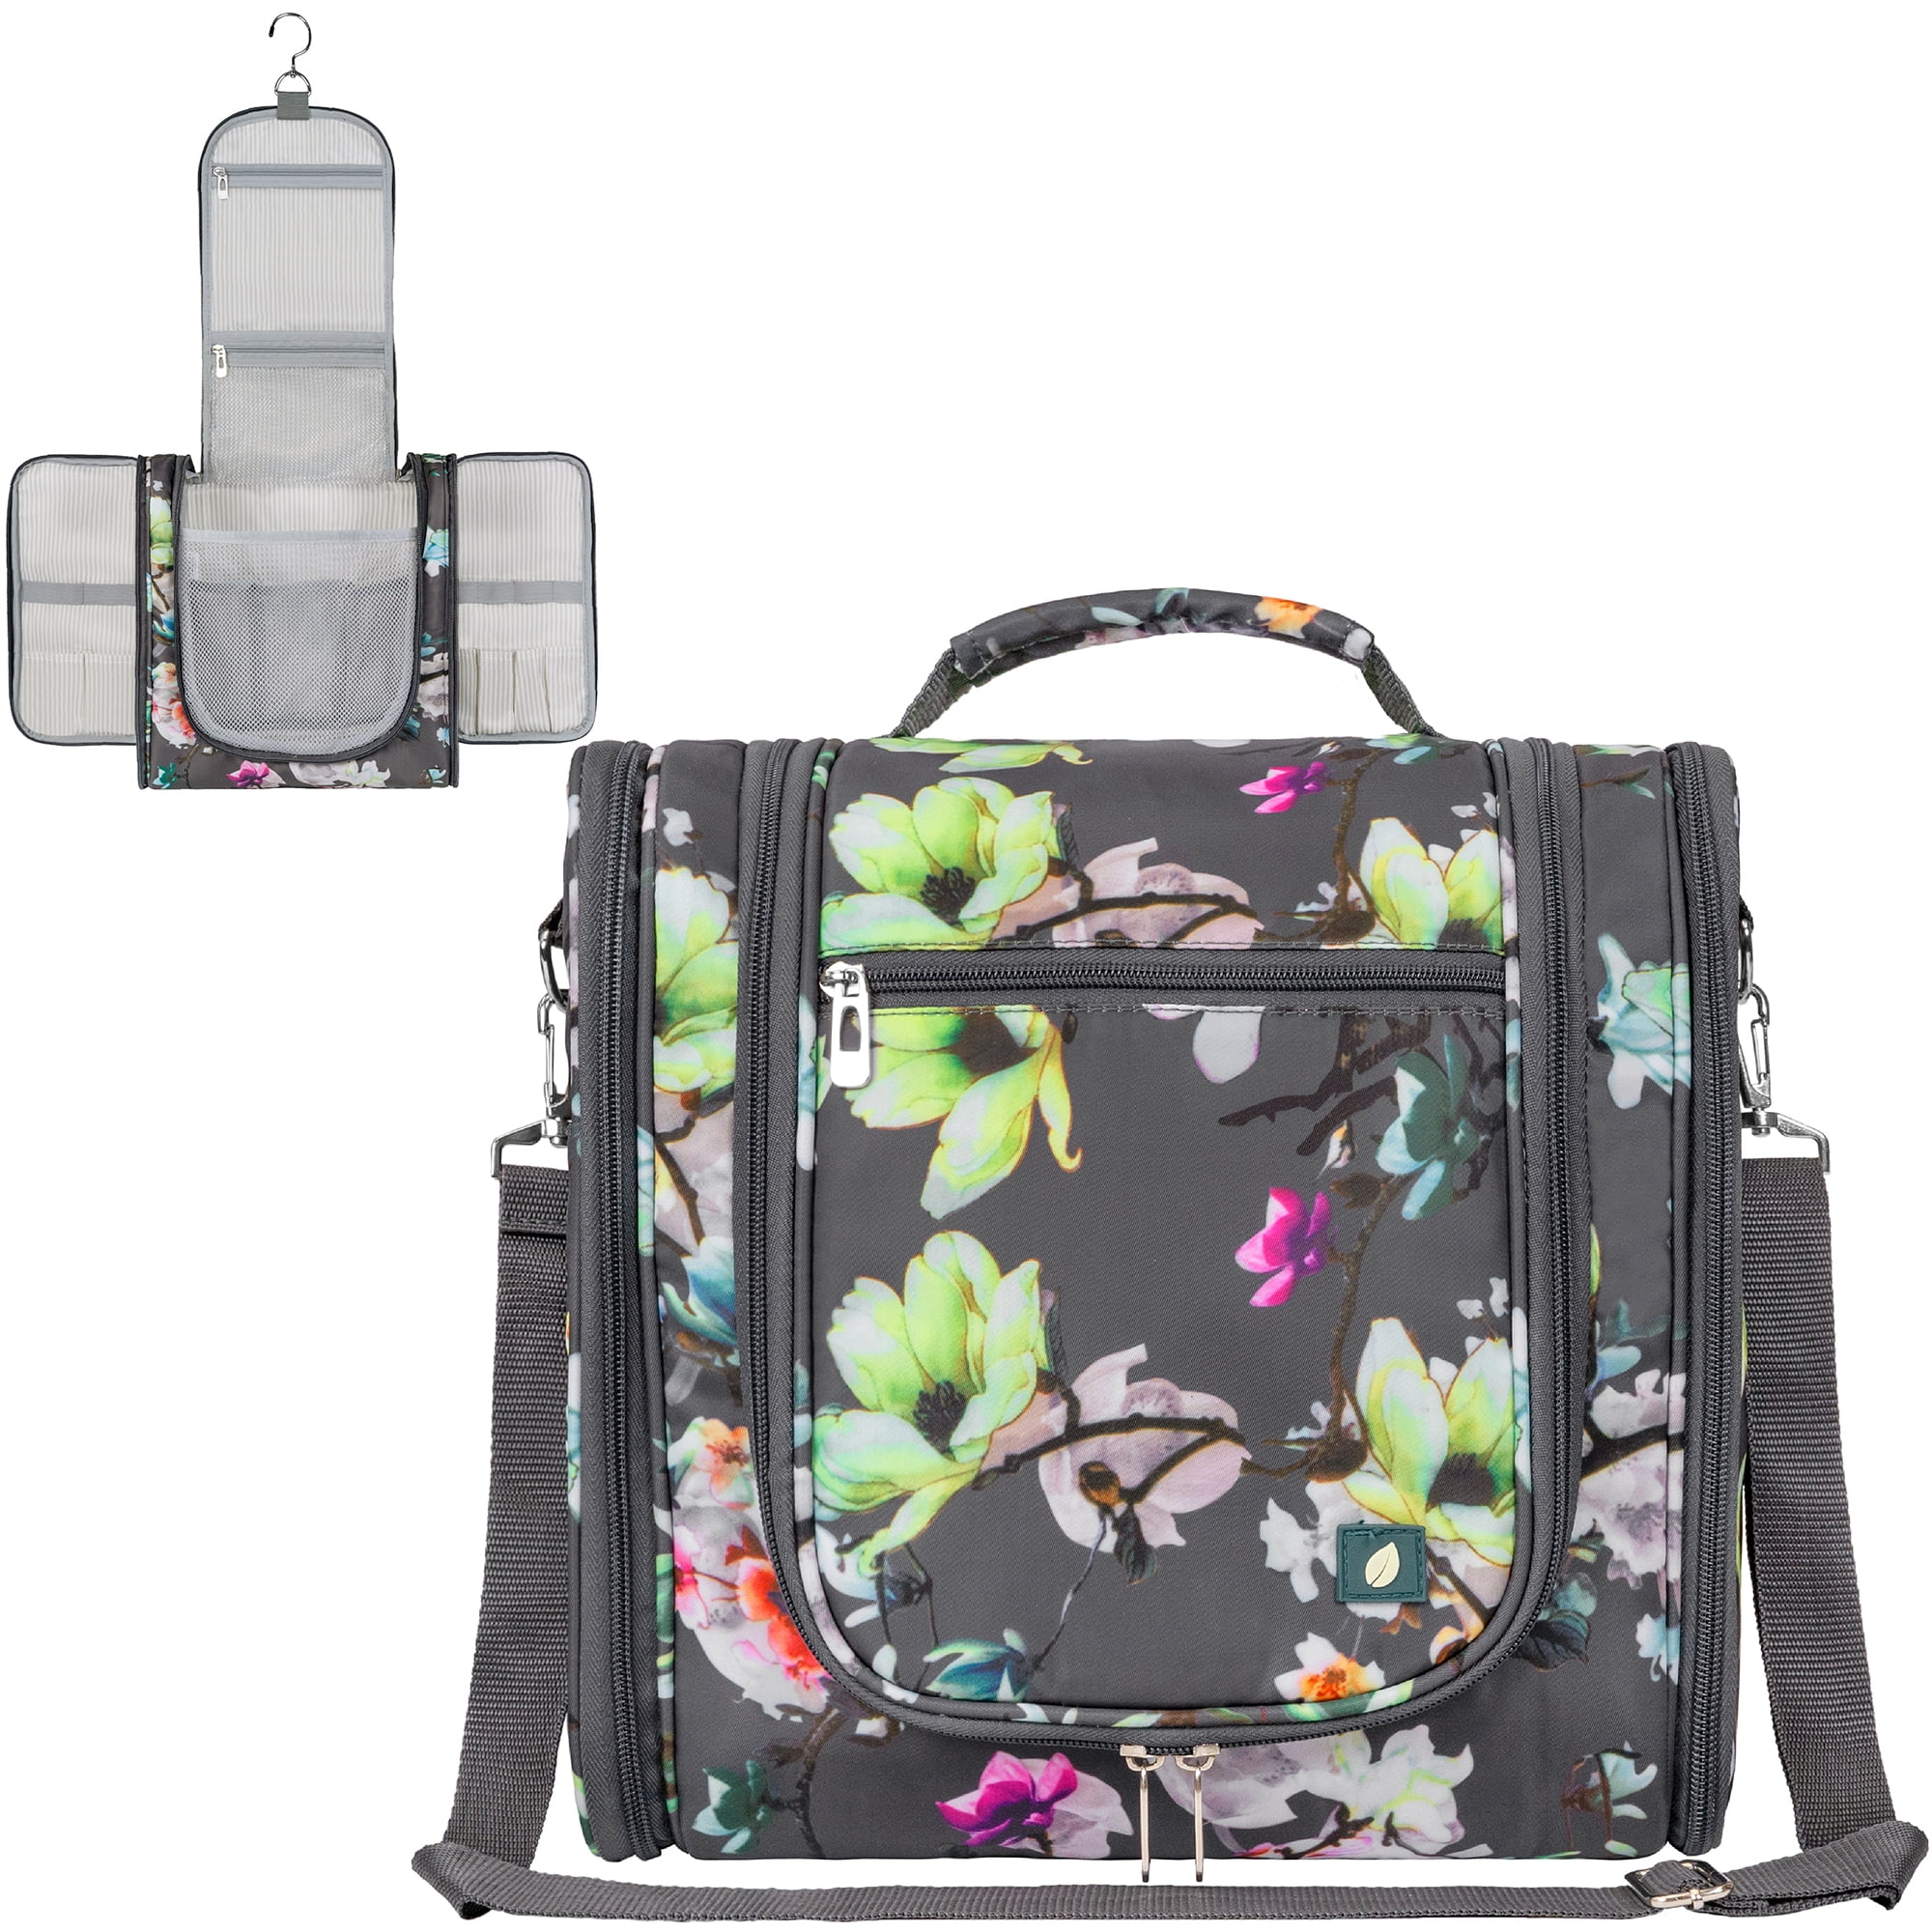 Hanging Travel Toiletry Bag - Large Cosmetics, Makeup And